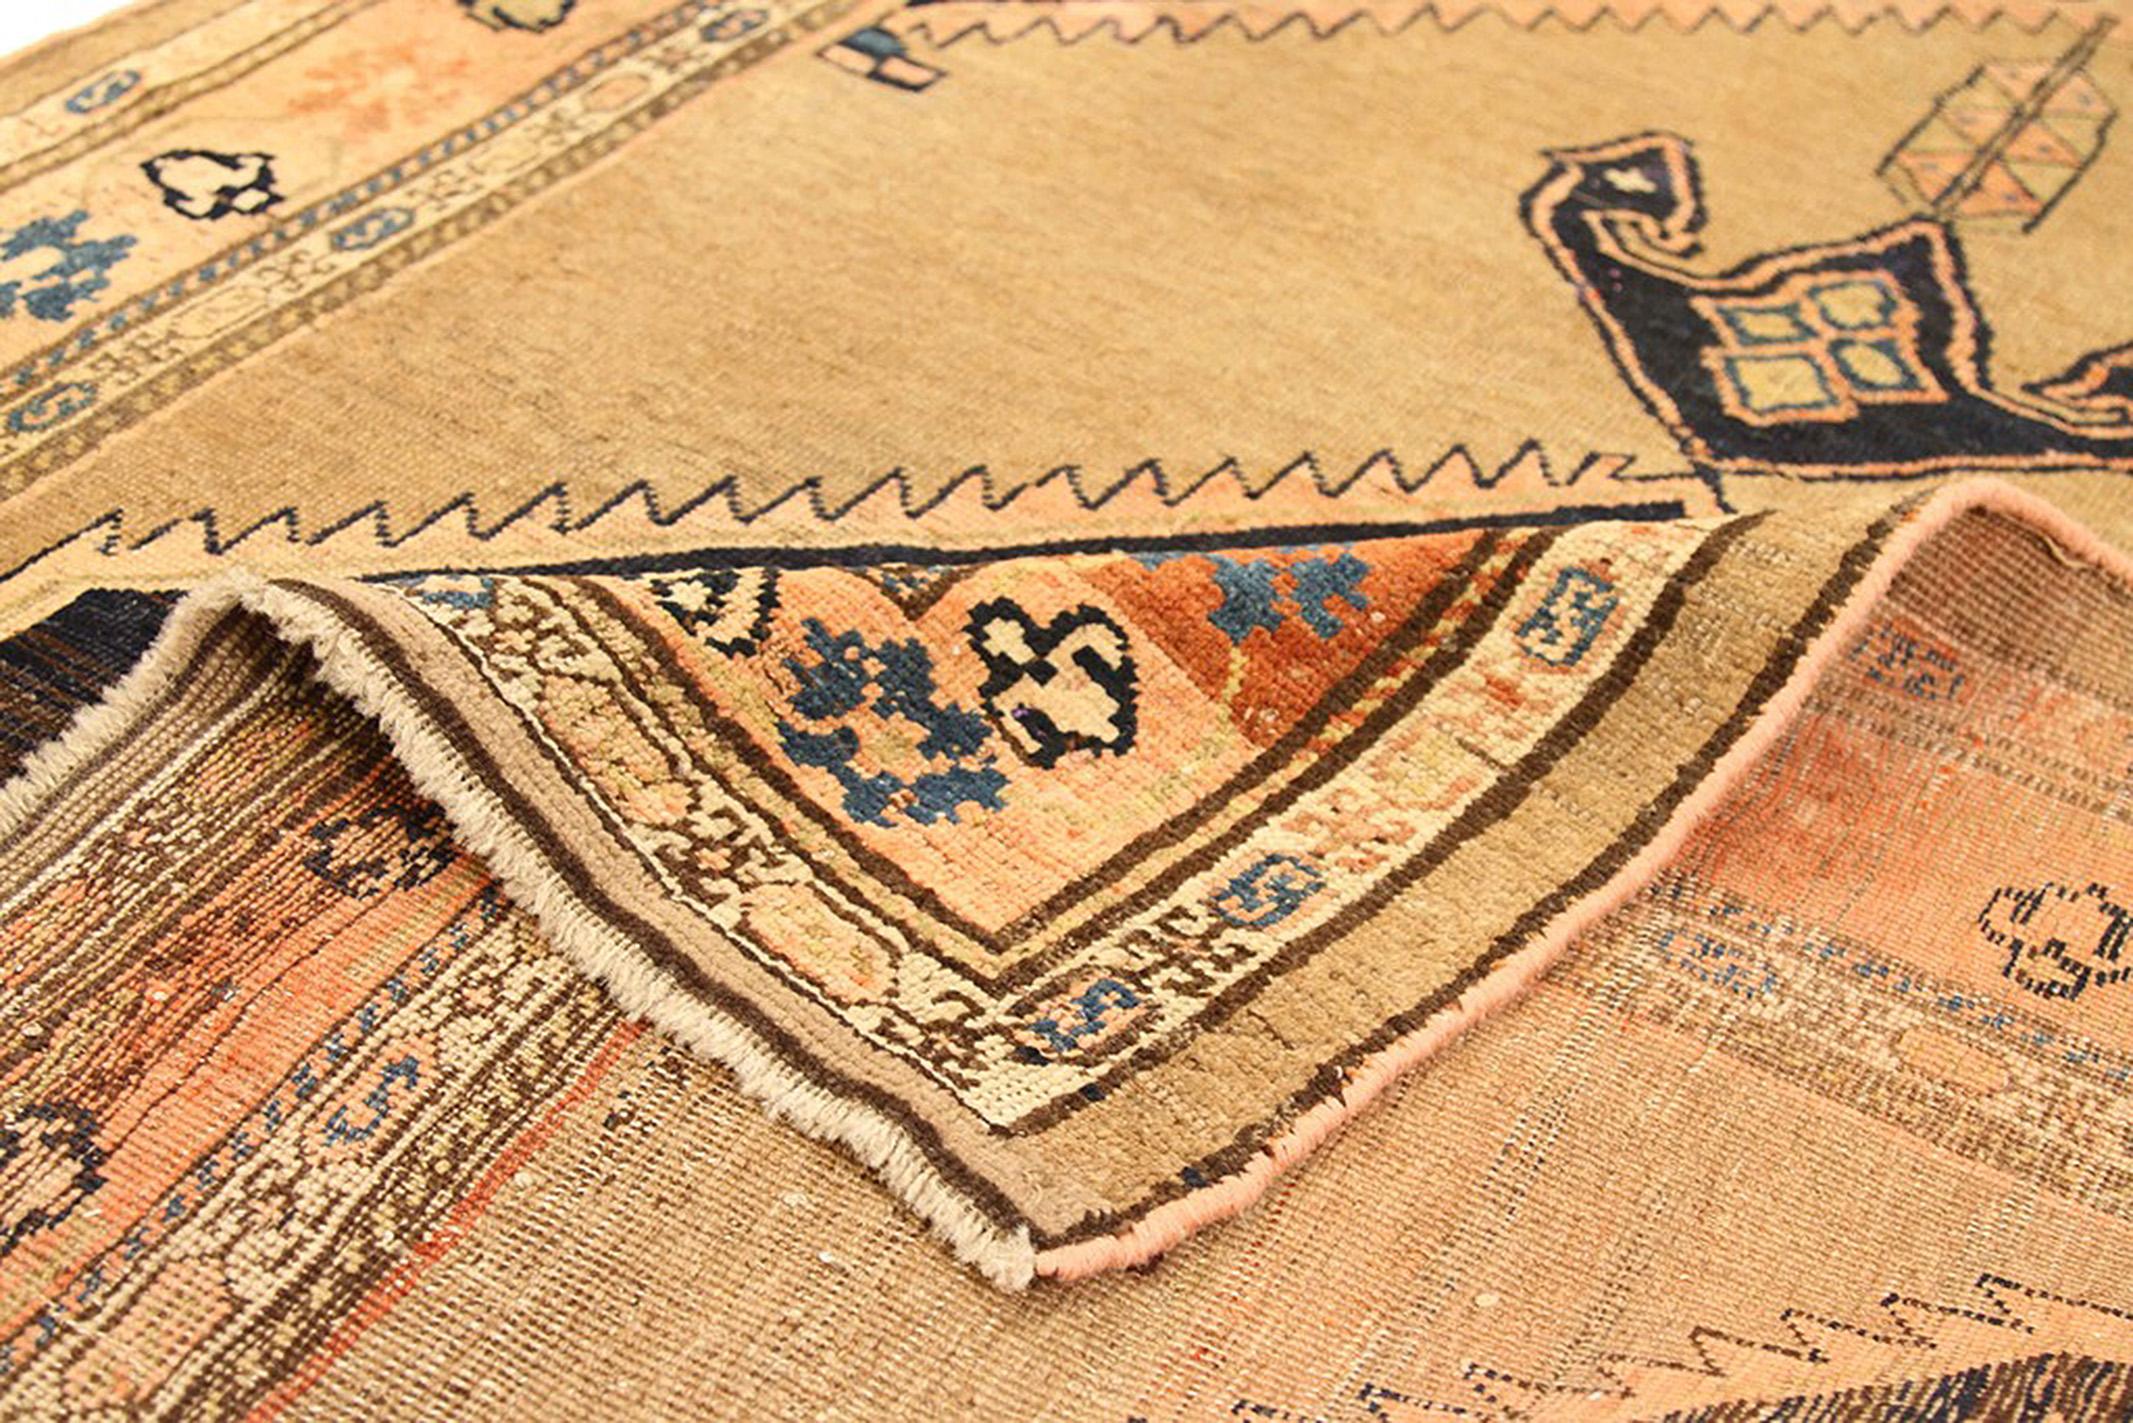 Antique Persian runner rug handwoven from the finest sheep’s wool and colored with all-natural vegetable dyes that are safe for humans and pets. It’s a traditional Bijar design featuring large medallions in black and beige over the center field.